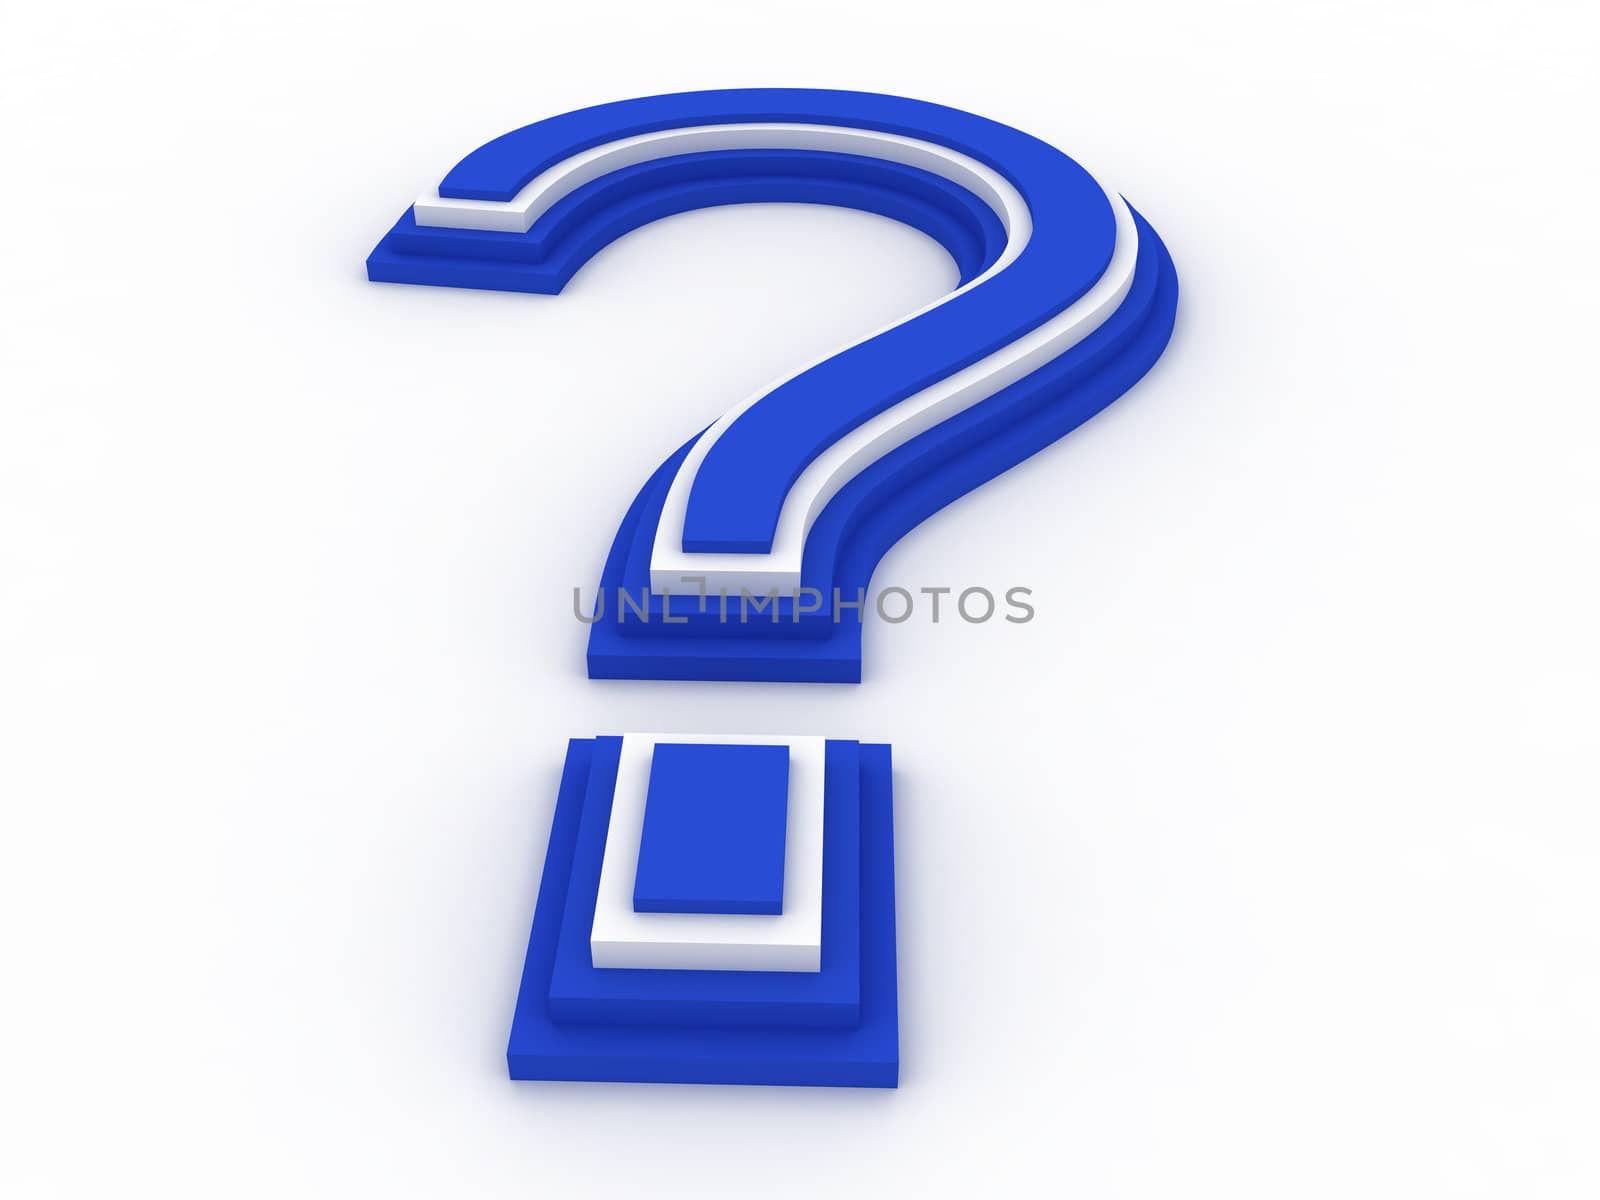 3D question mark isolated on white background.